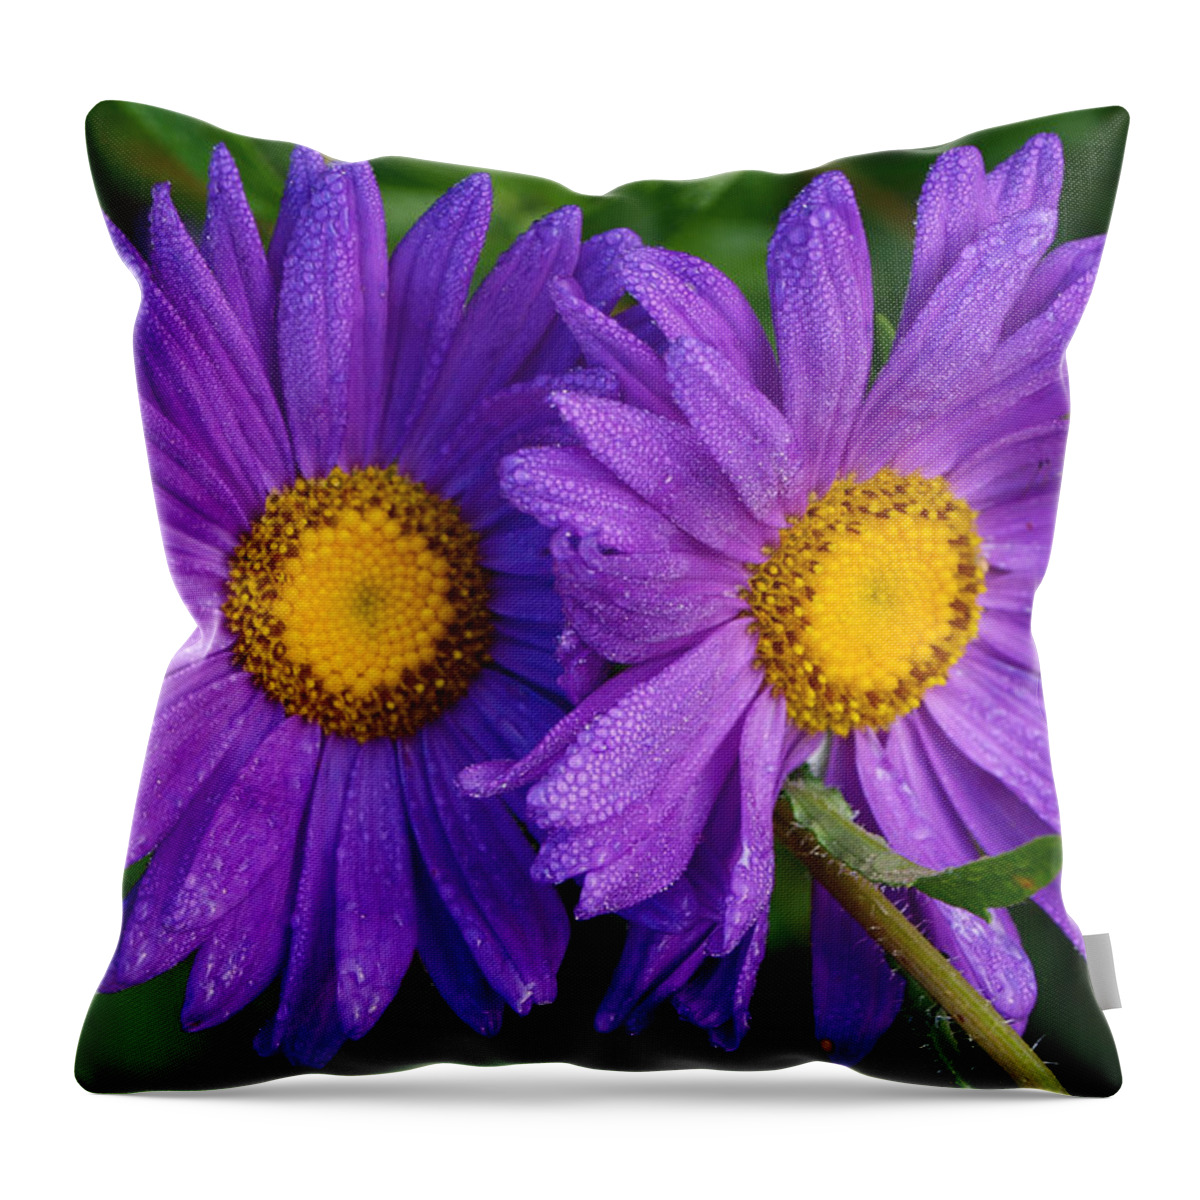 Purity Throw Pillow featuring the photograph Purity by Tom Druin